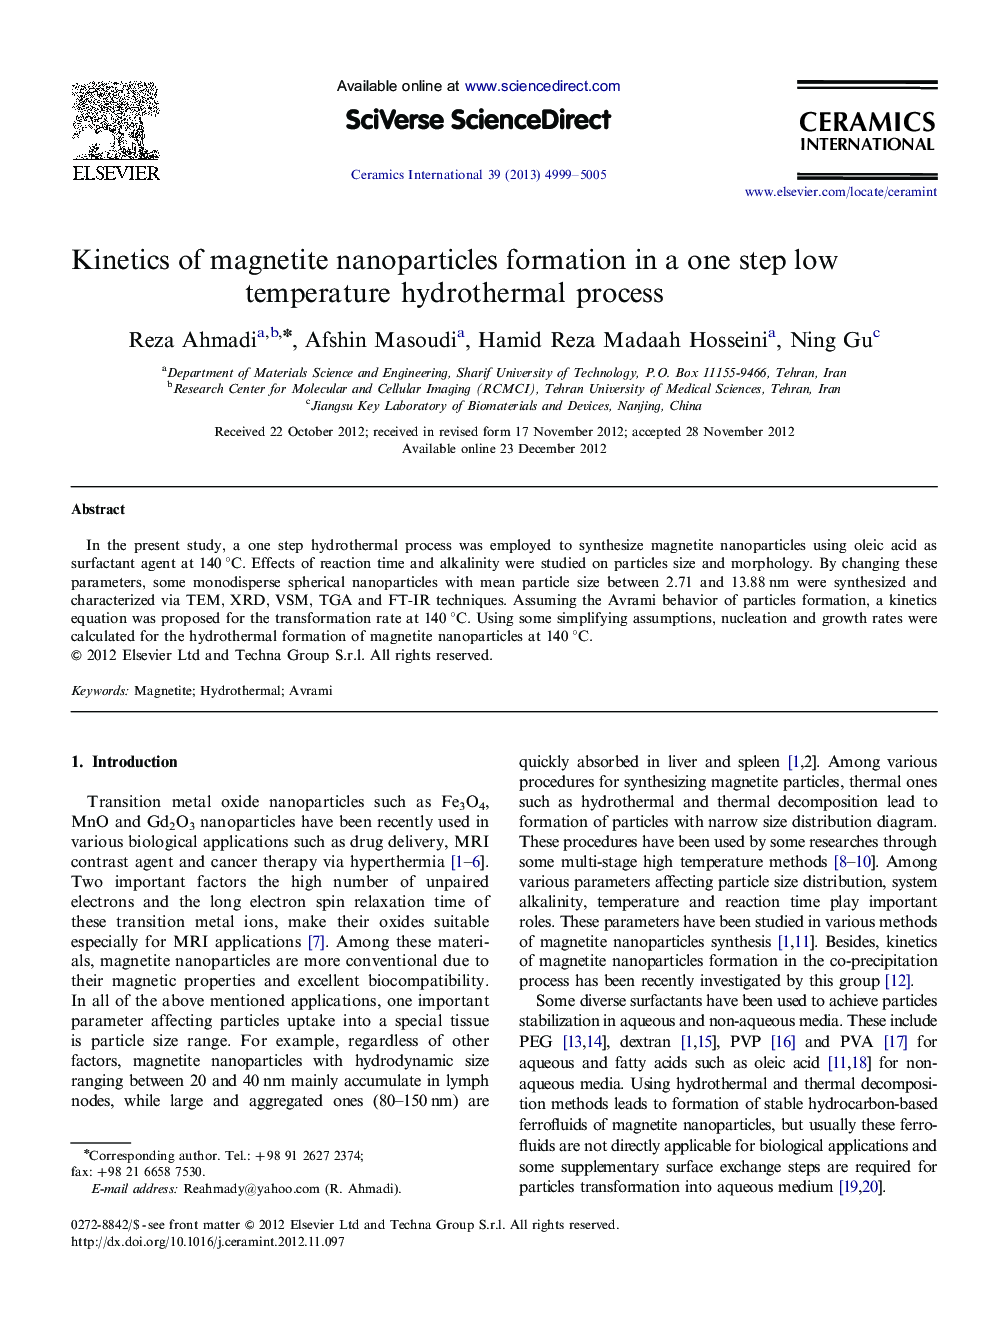 Kinetics of magnetite nanoparticles formation in a one step low temperature hydrothermal process